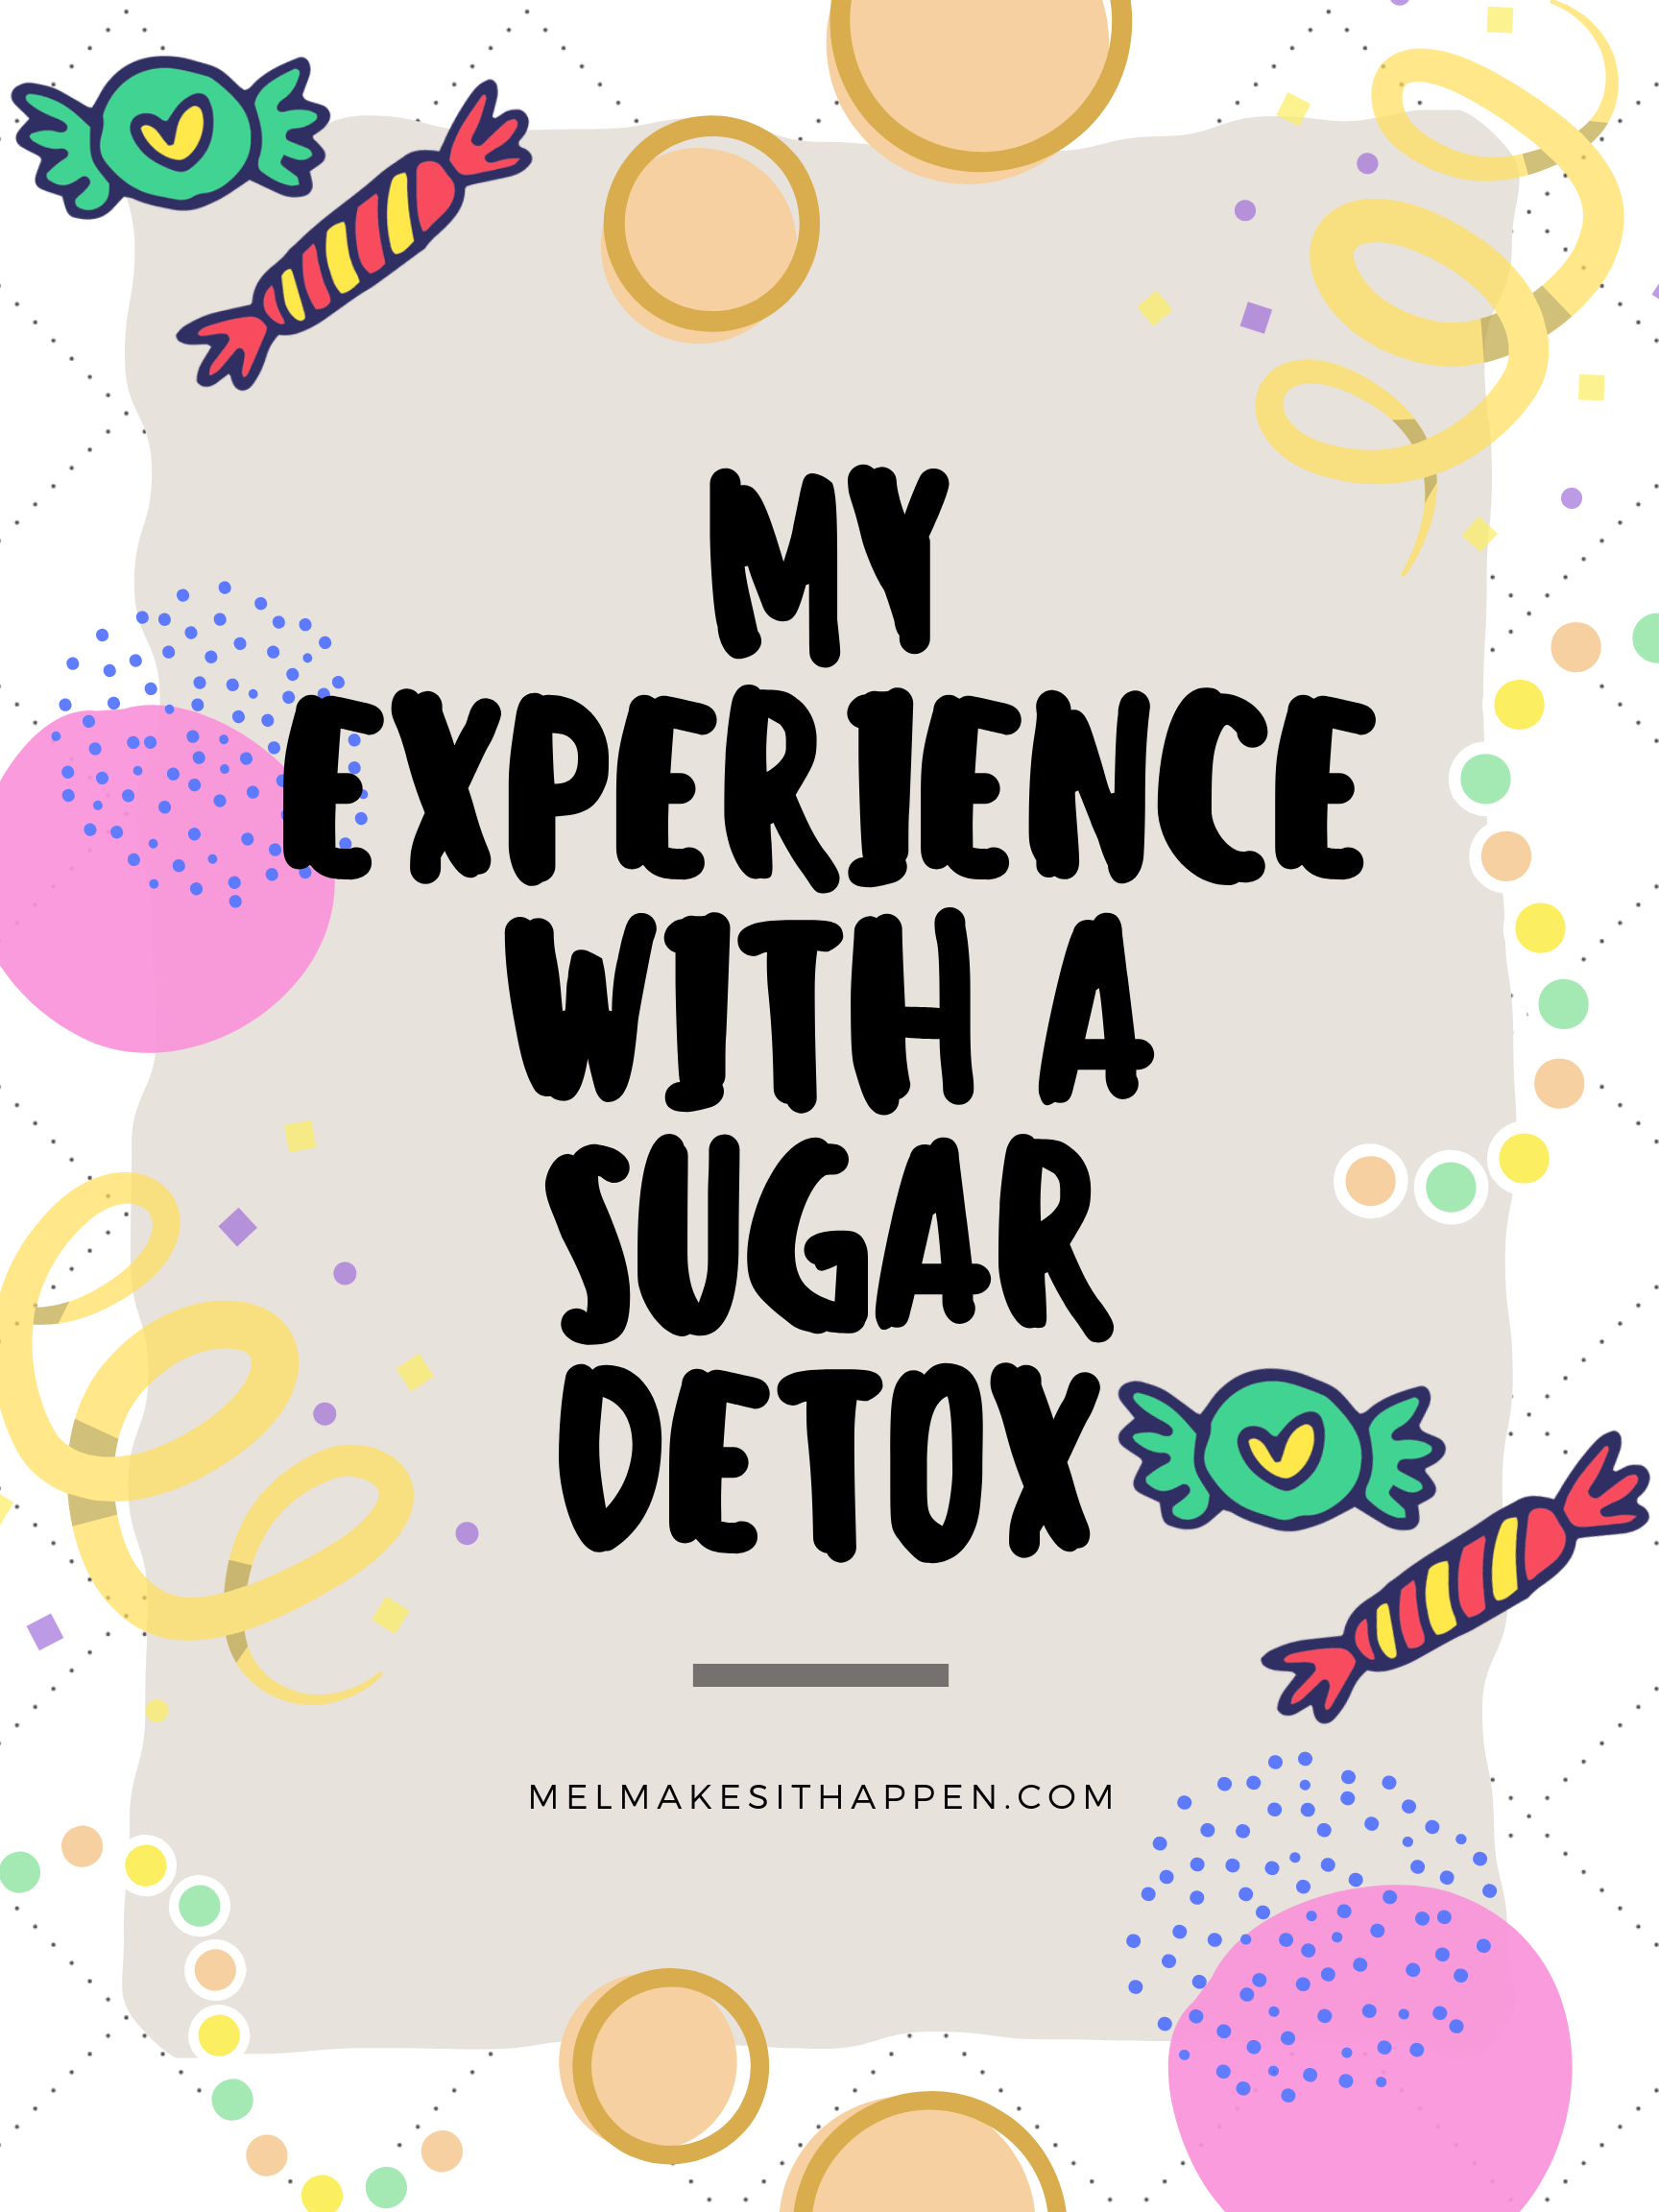 My Experience with a Sugar Detox